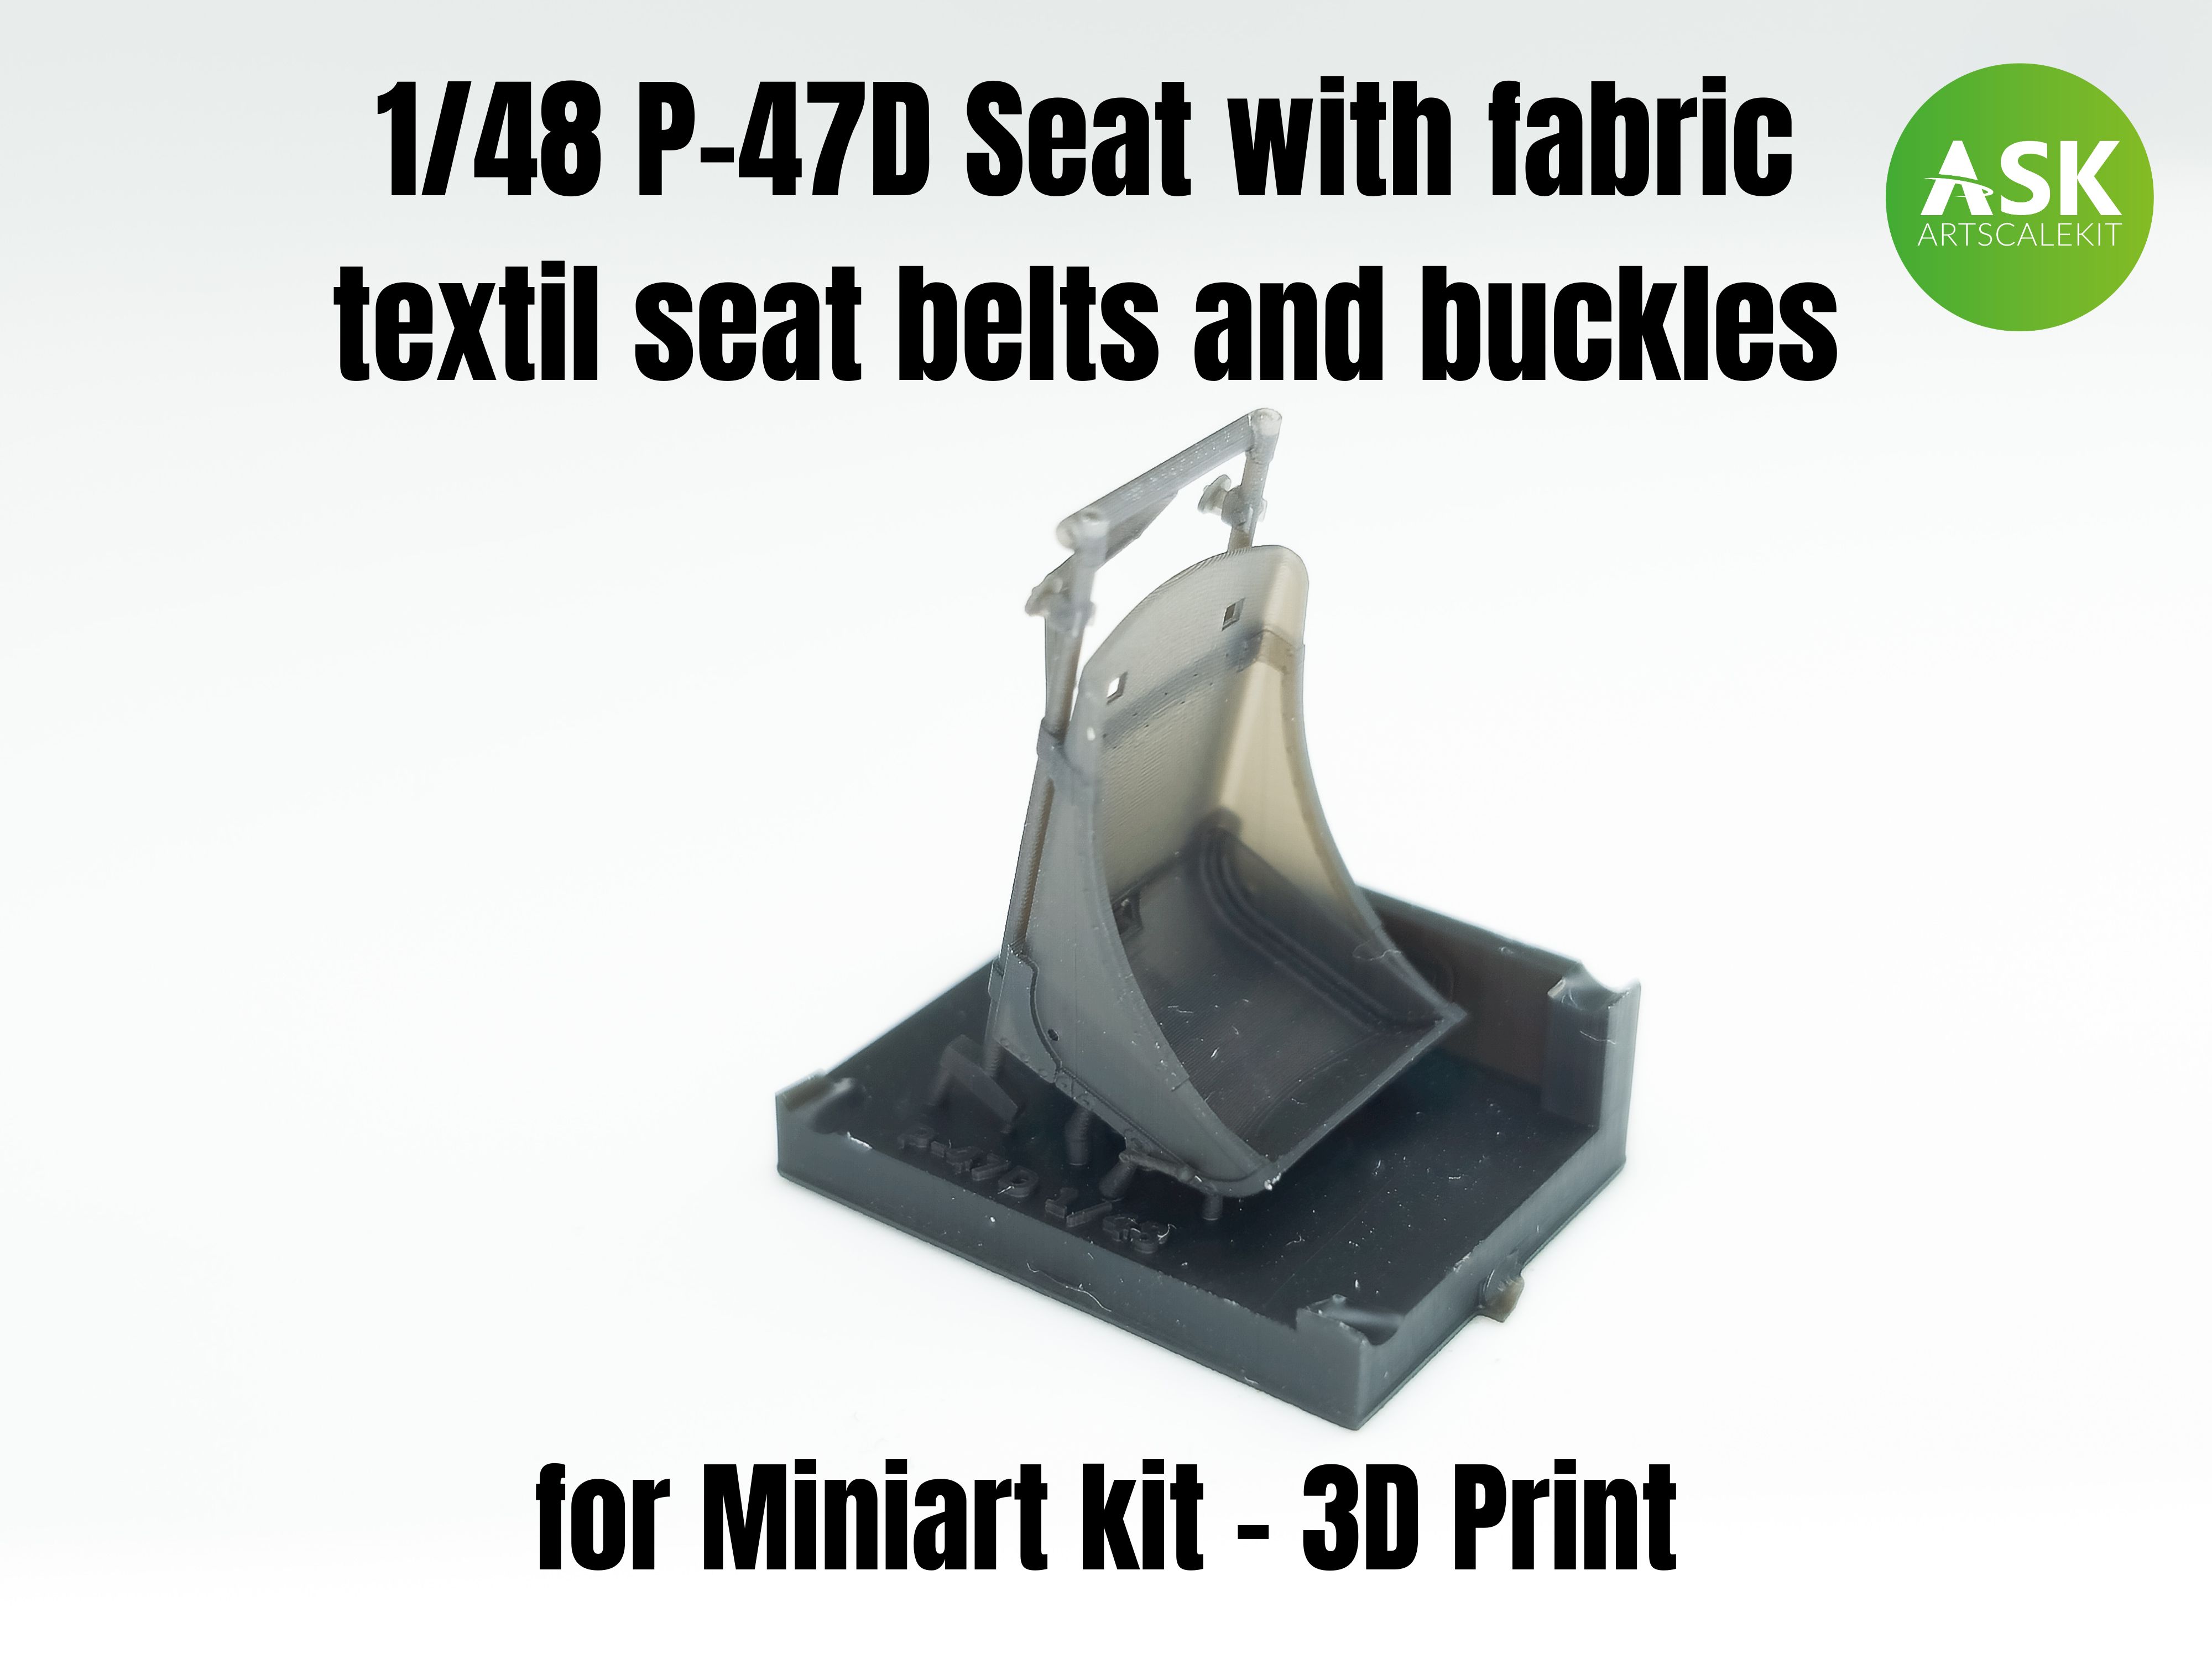 1/48 P-47D Seat with fabric textil seat belts and buckles